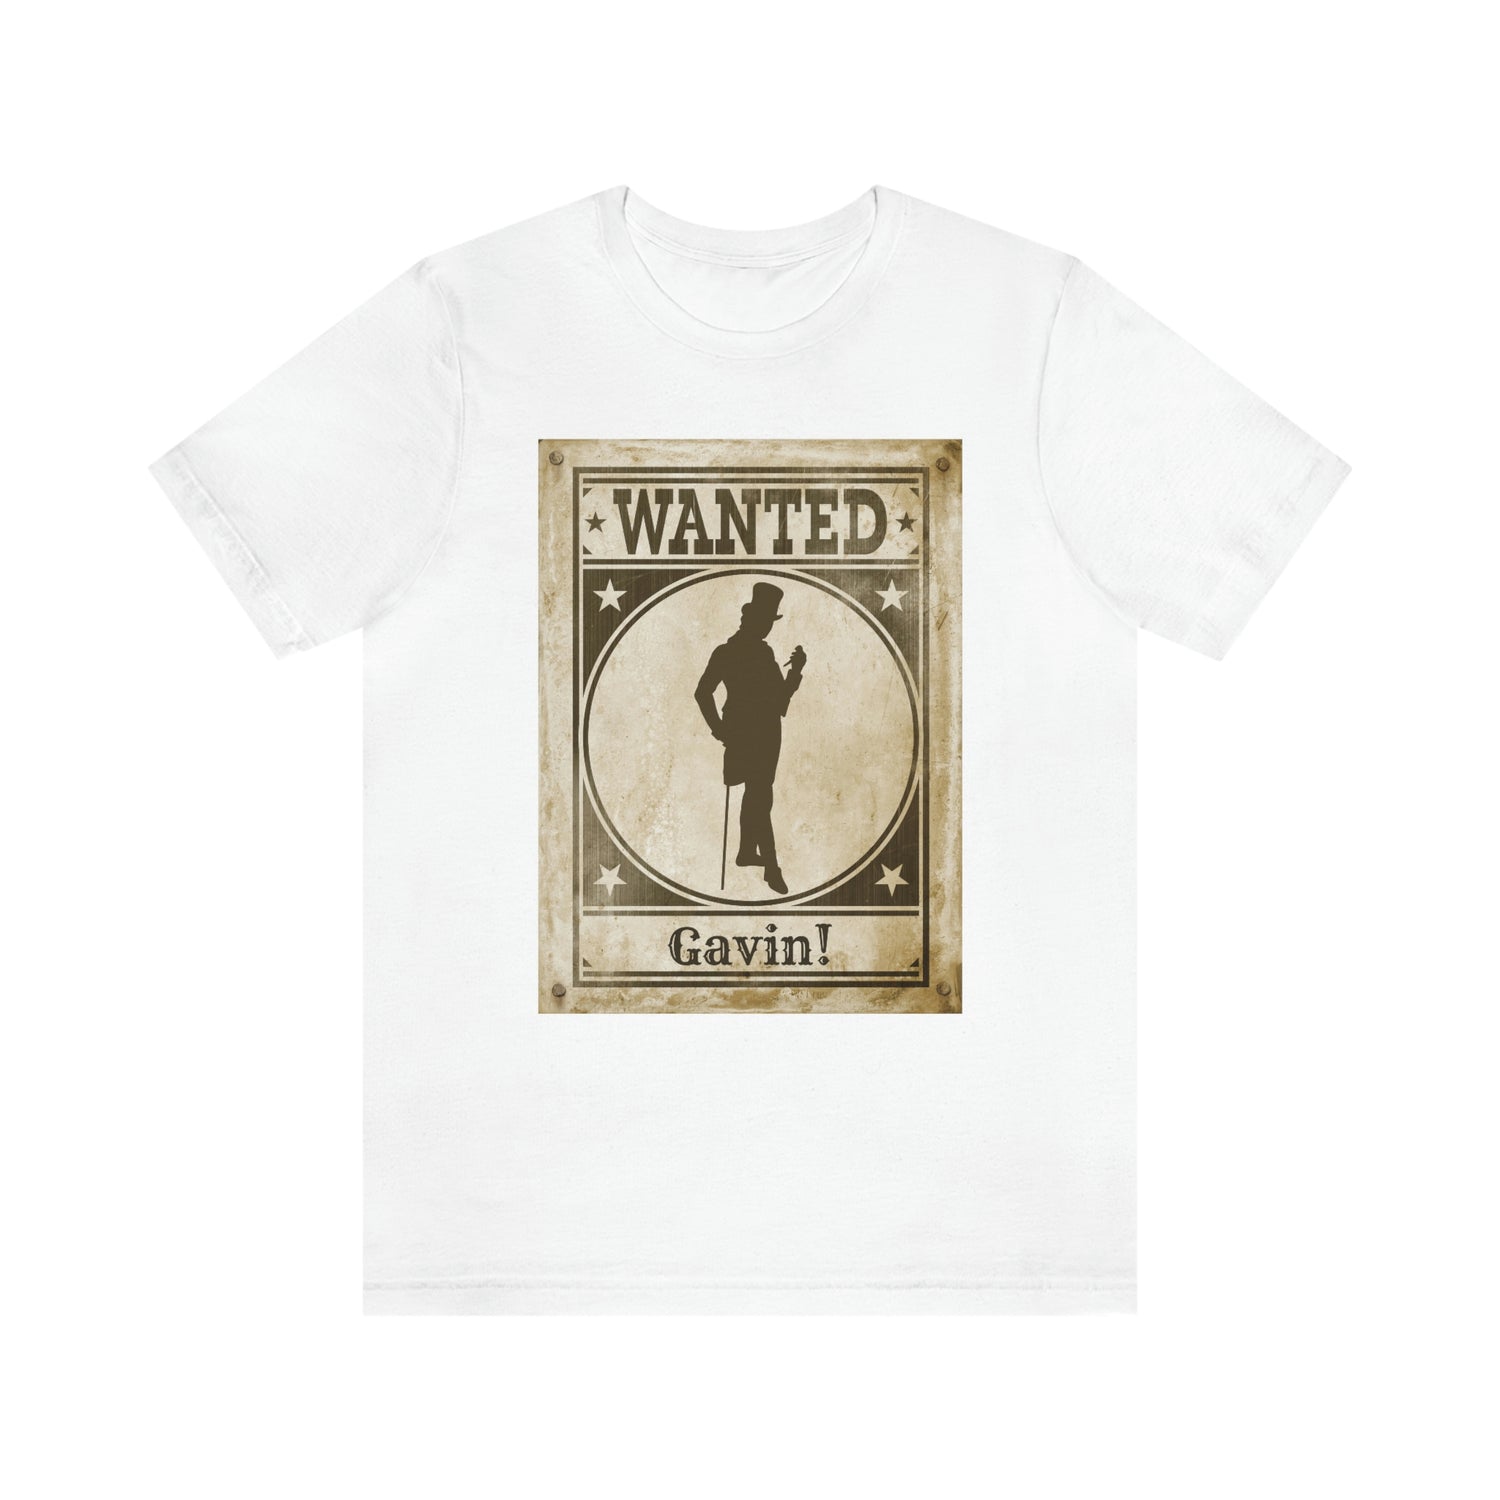 GAVIN  Wanted Sign - Have you seen my mate Gavin? Red Dead Redemption inspired parady tshirt Lord and Lady Towers